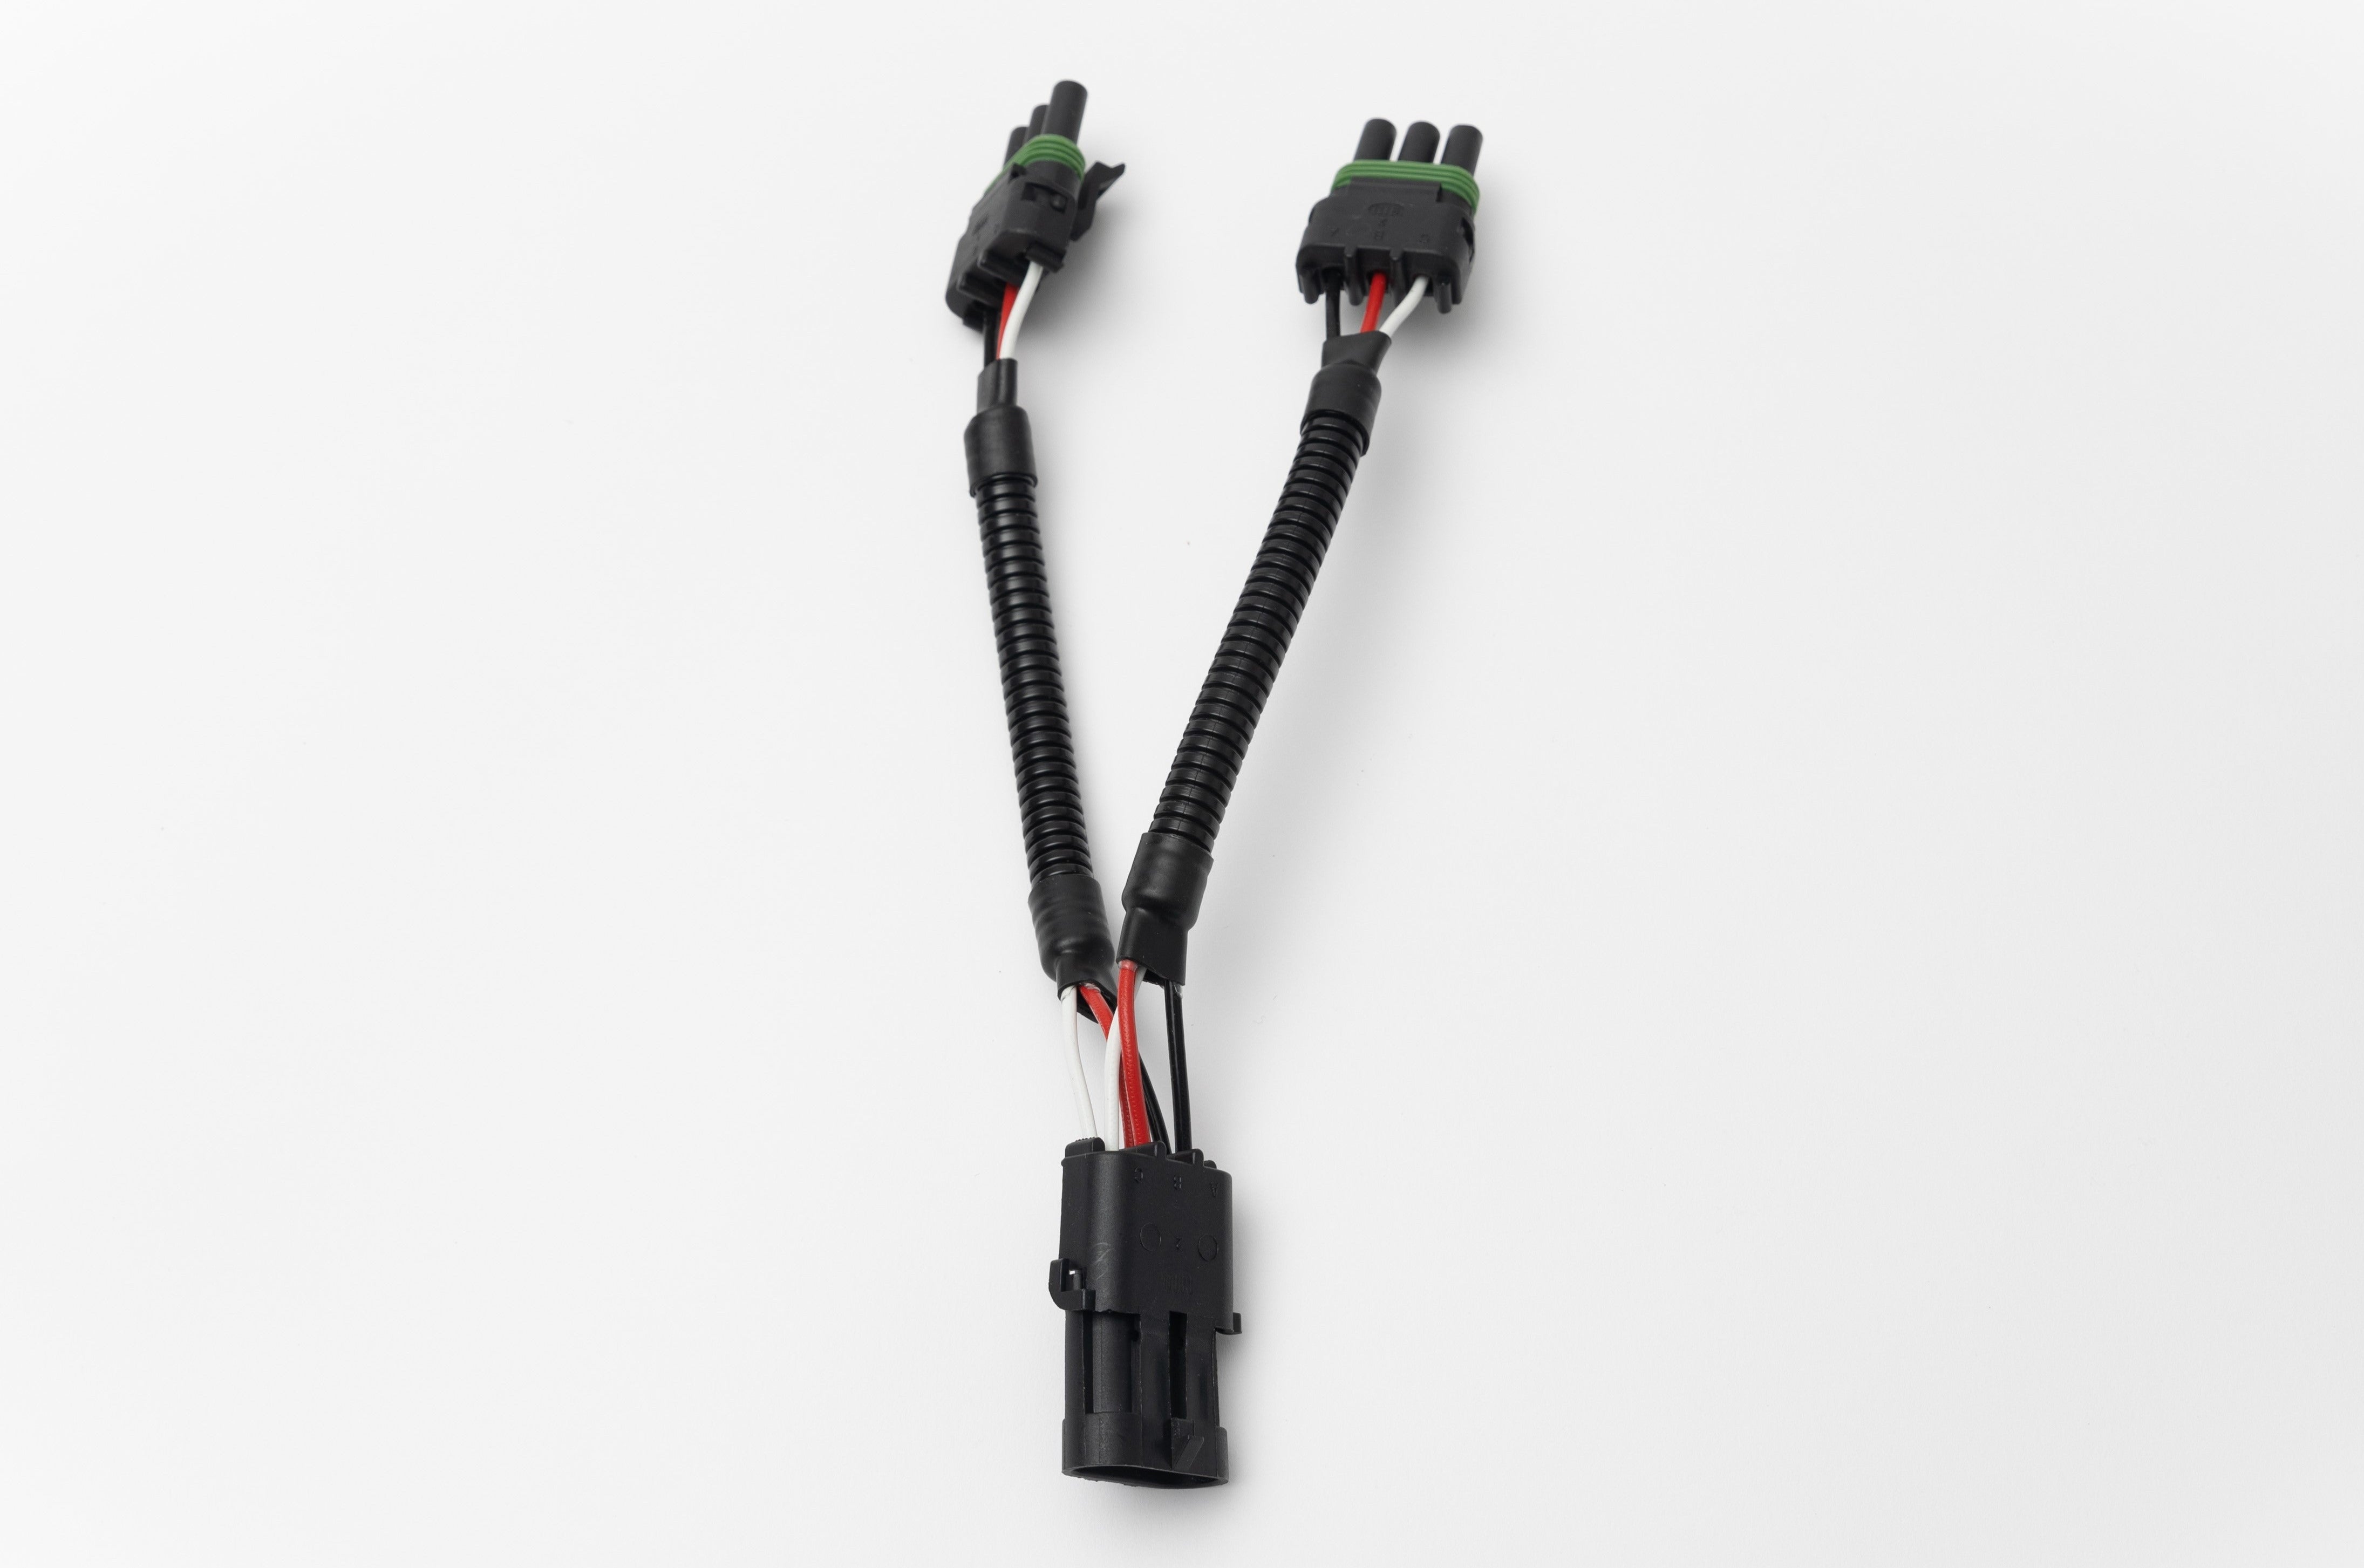 SPV Parts 2 Way HARNESS Splitter with 3 Pole WP Connectors (Single) - SPV Harness System (Works with MANY vehicles, See Details)